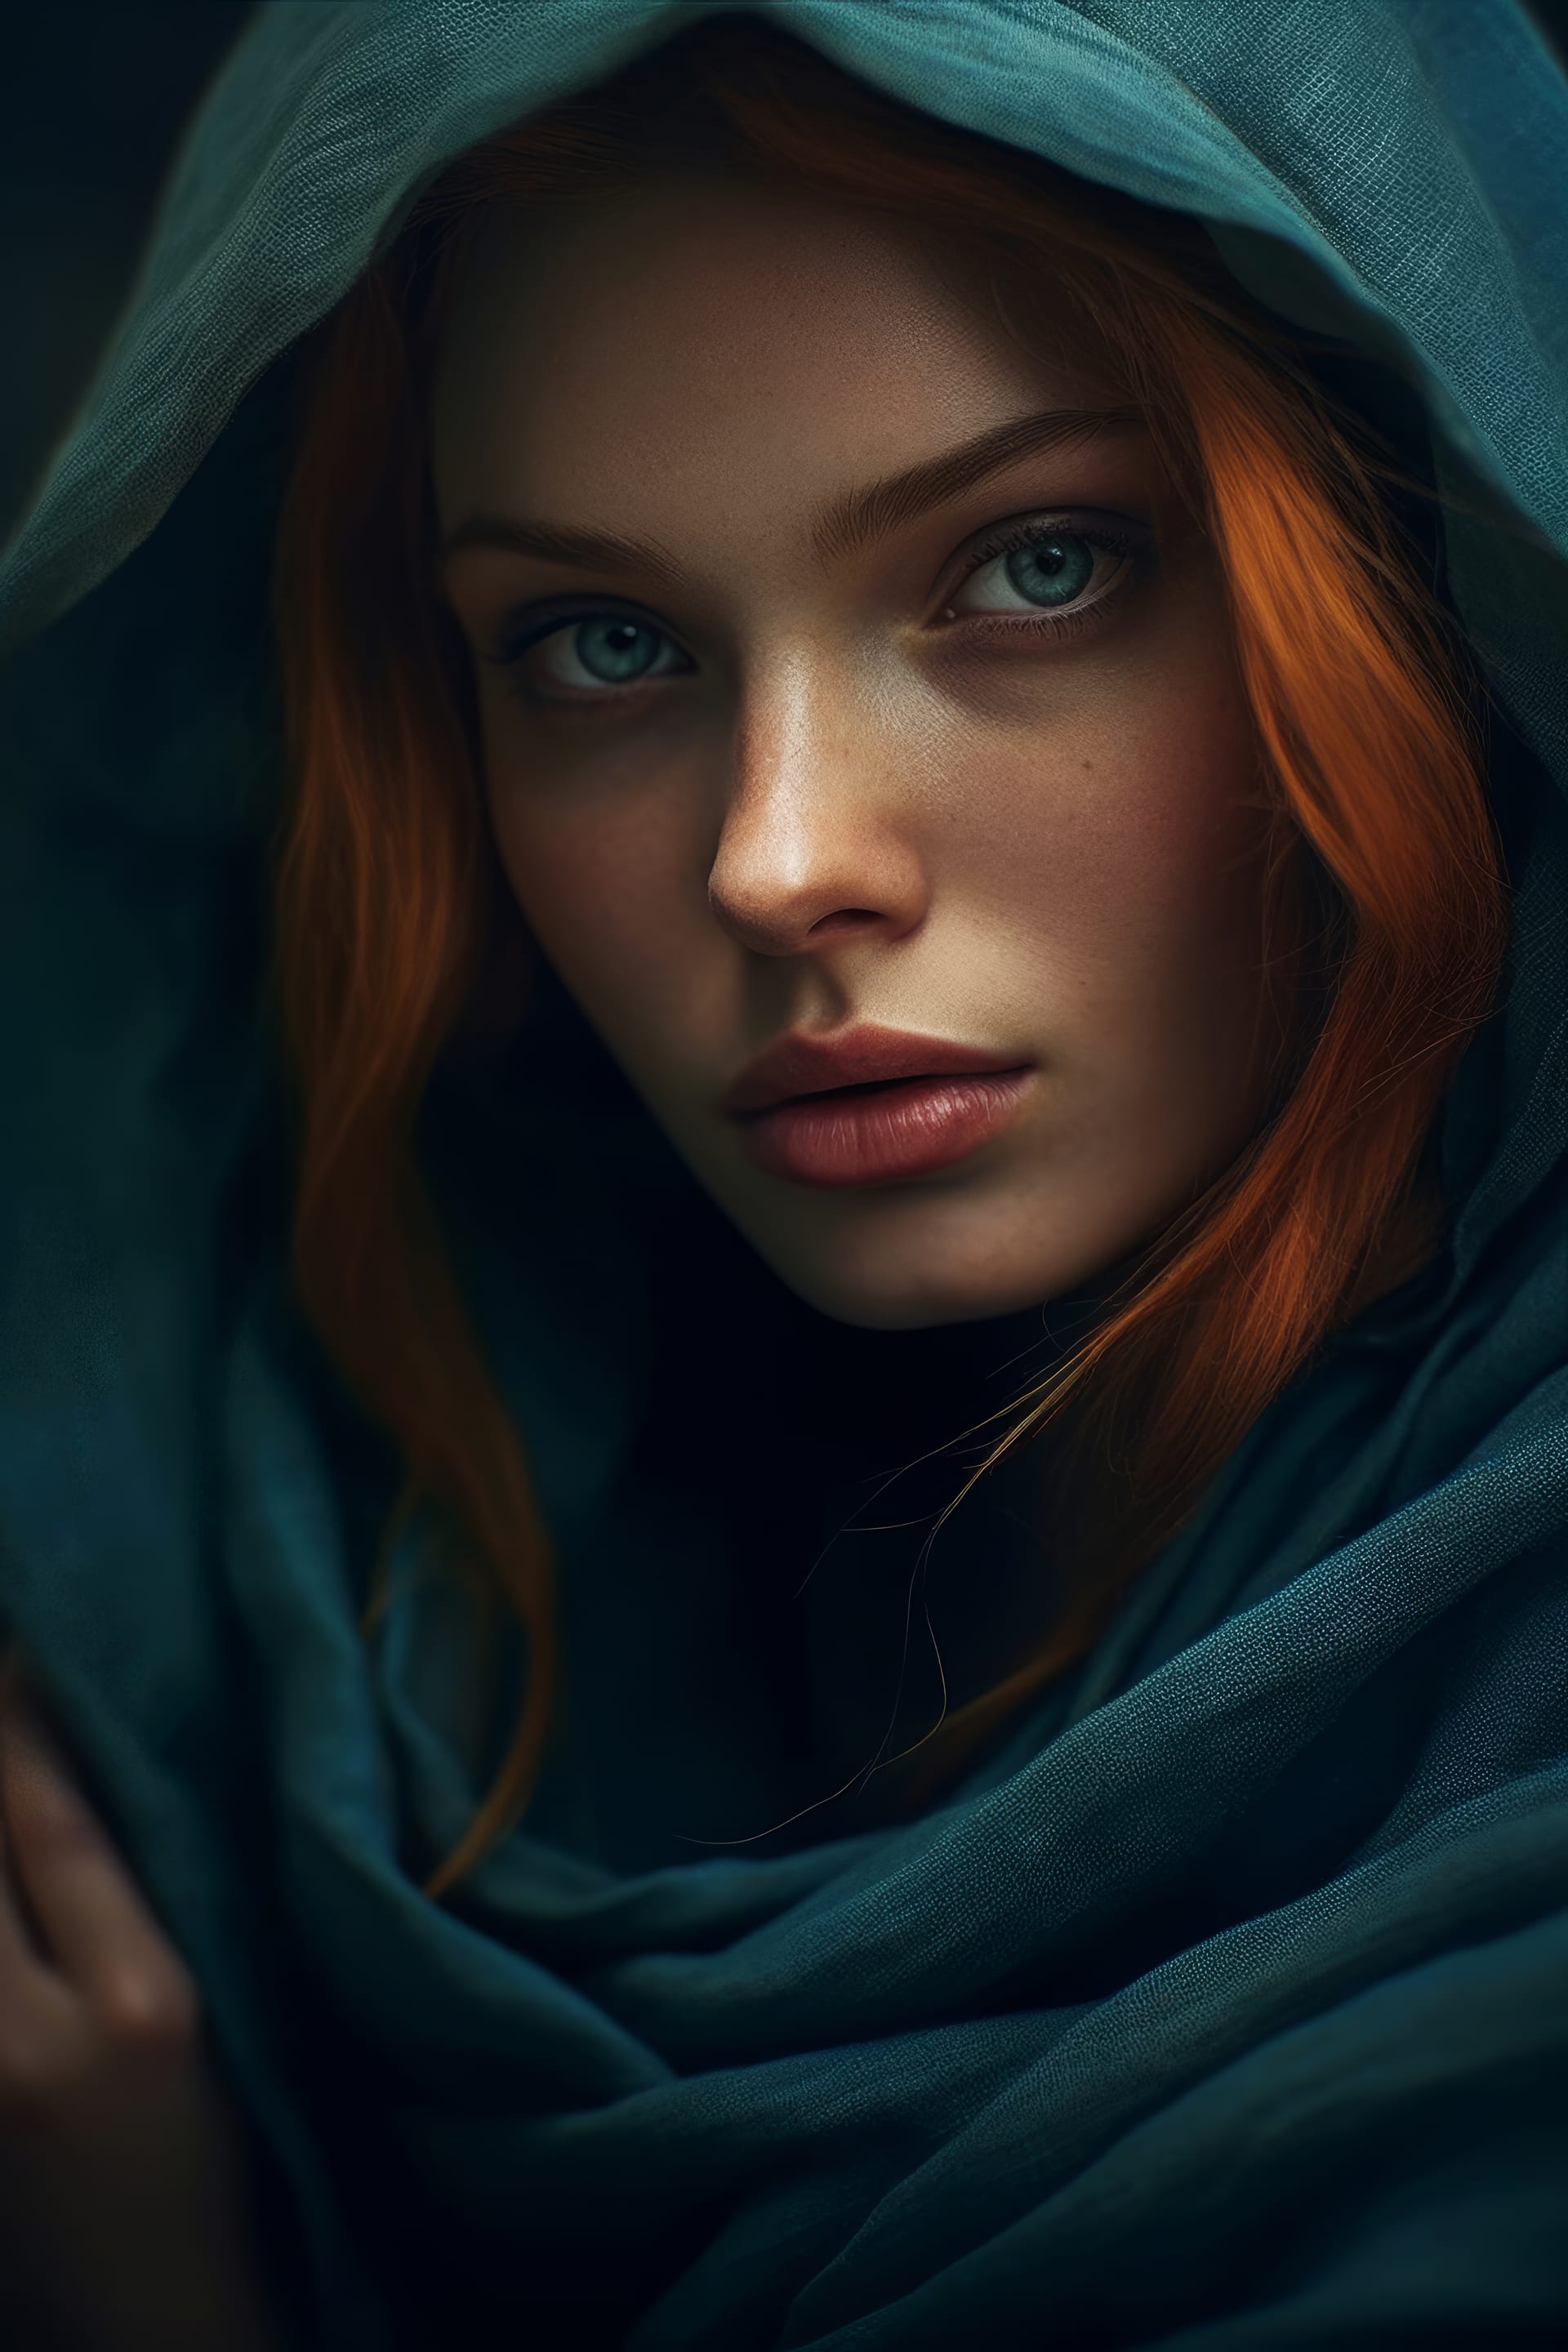 Girl with red hair blue eyes looks into camera